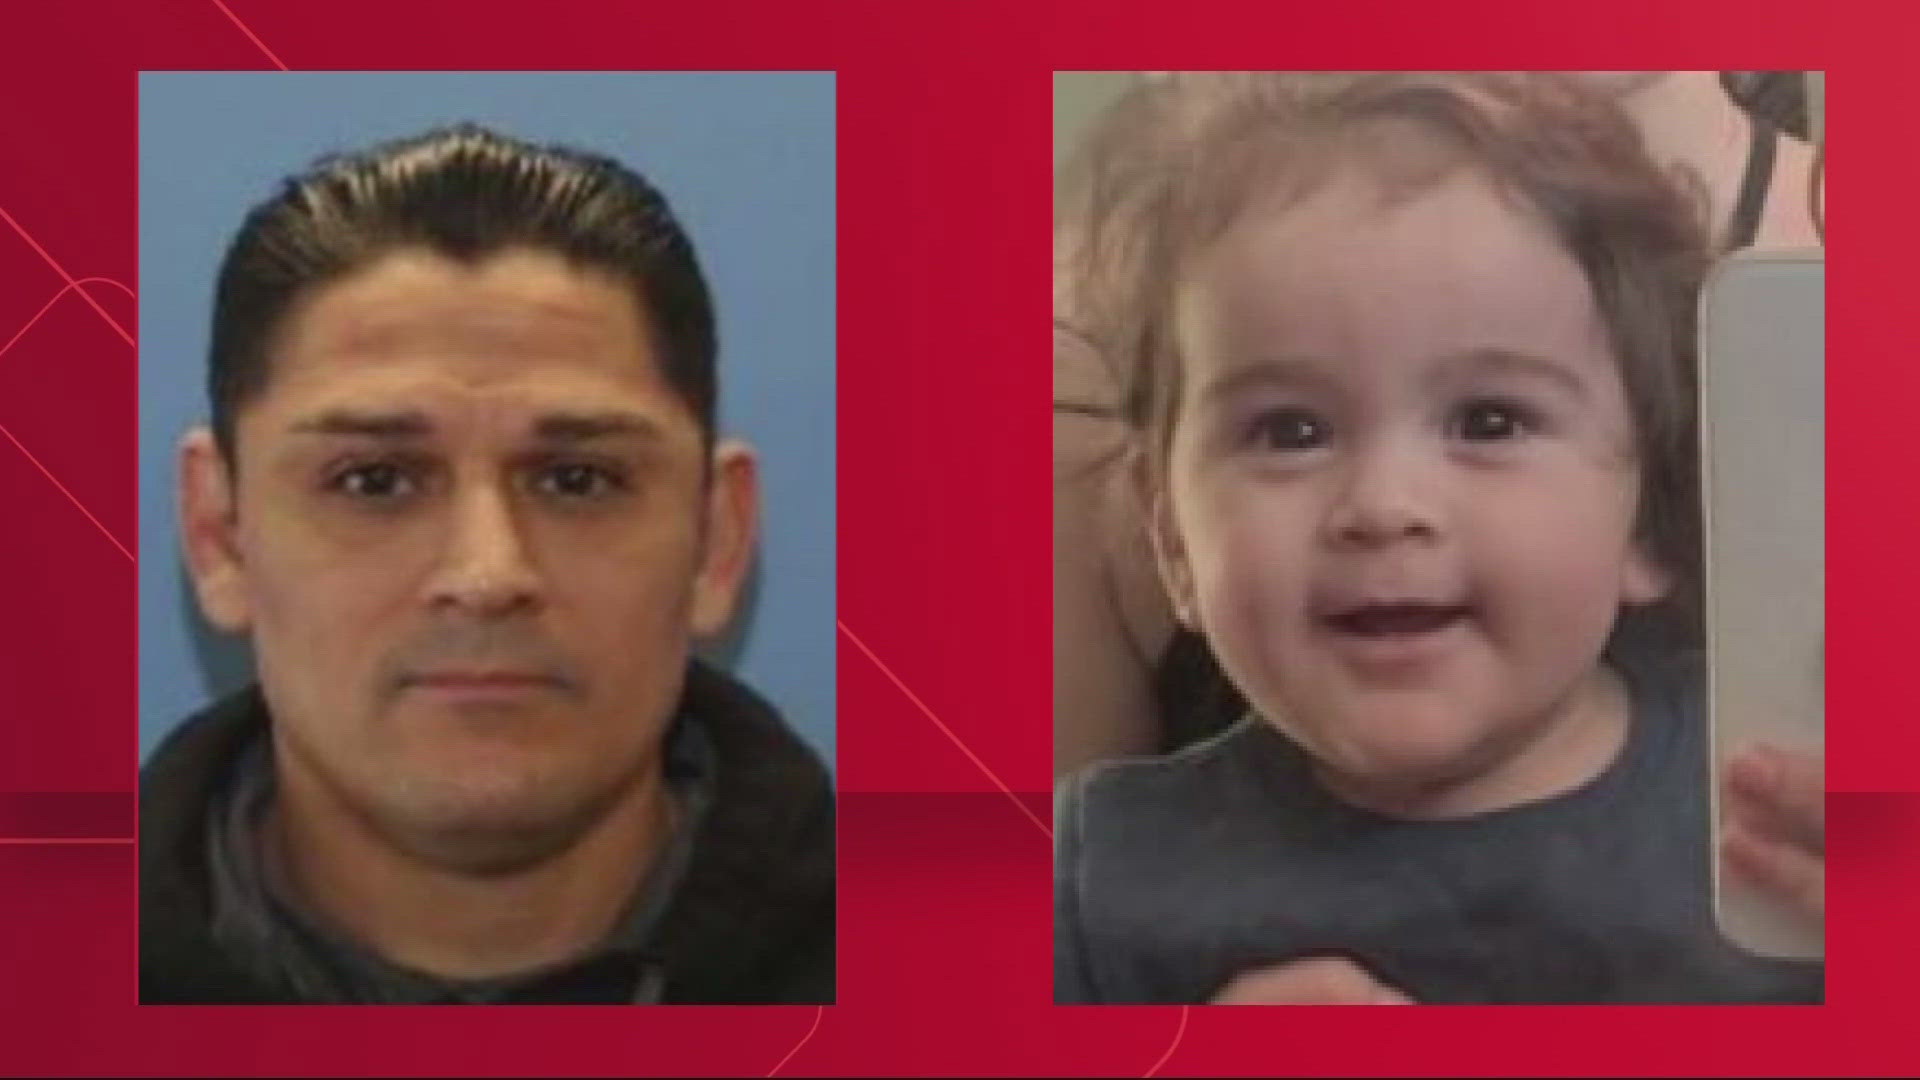 Elias Huizar is suspected of killing his ex-wife and girlfriend in Washington and abducting a 1-year-old, sparking a manhunt. The child is now in police custody.